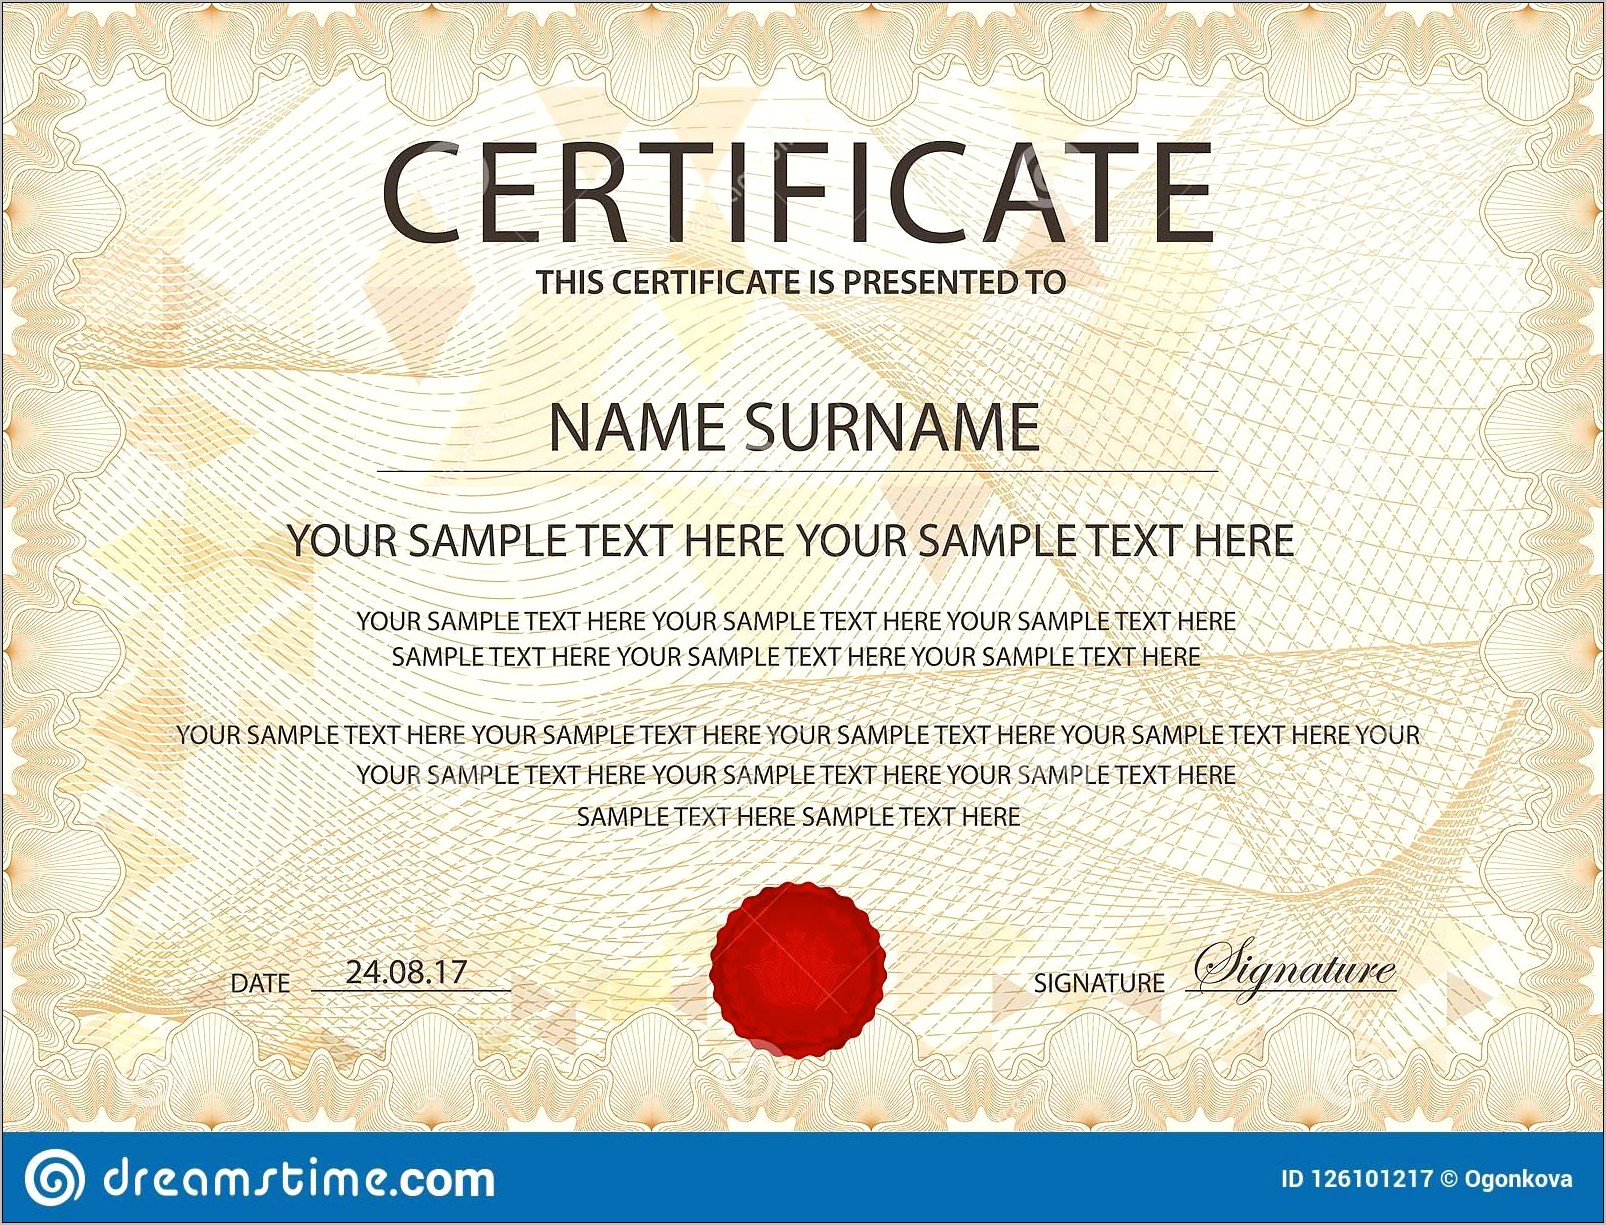 First Place Award Certificate Template Free